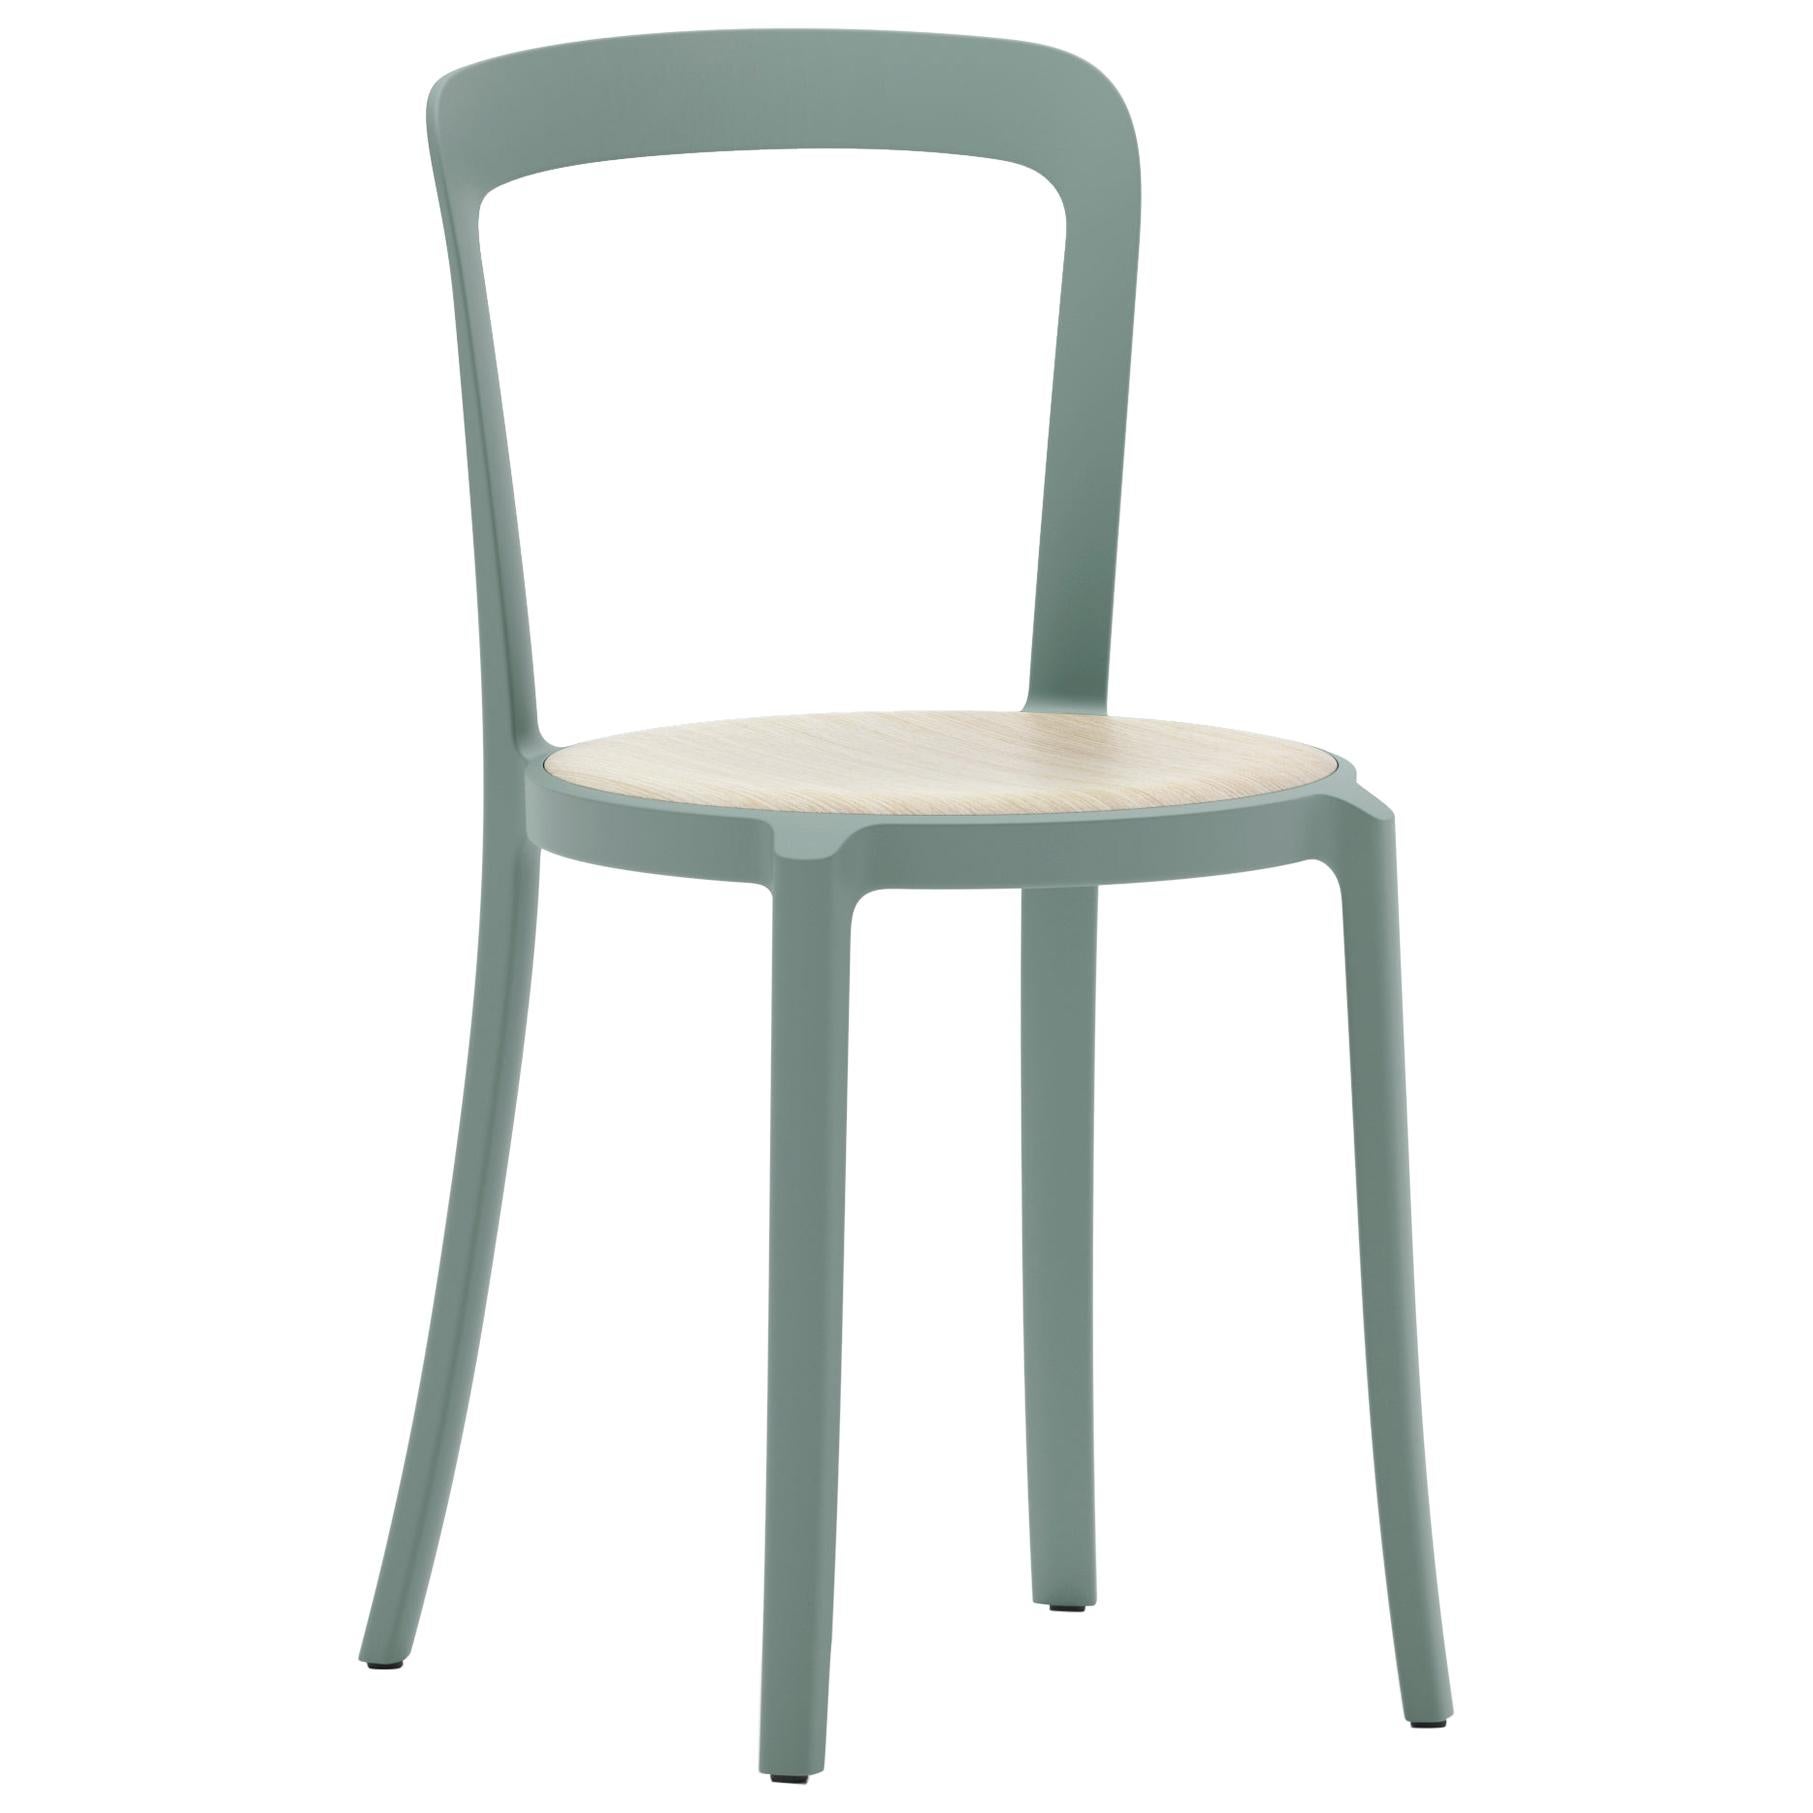 Emeco On & On Stacking Chair in Light Blue with Oak seat by Barber & Osgerby